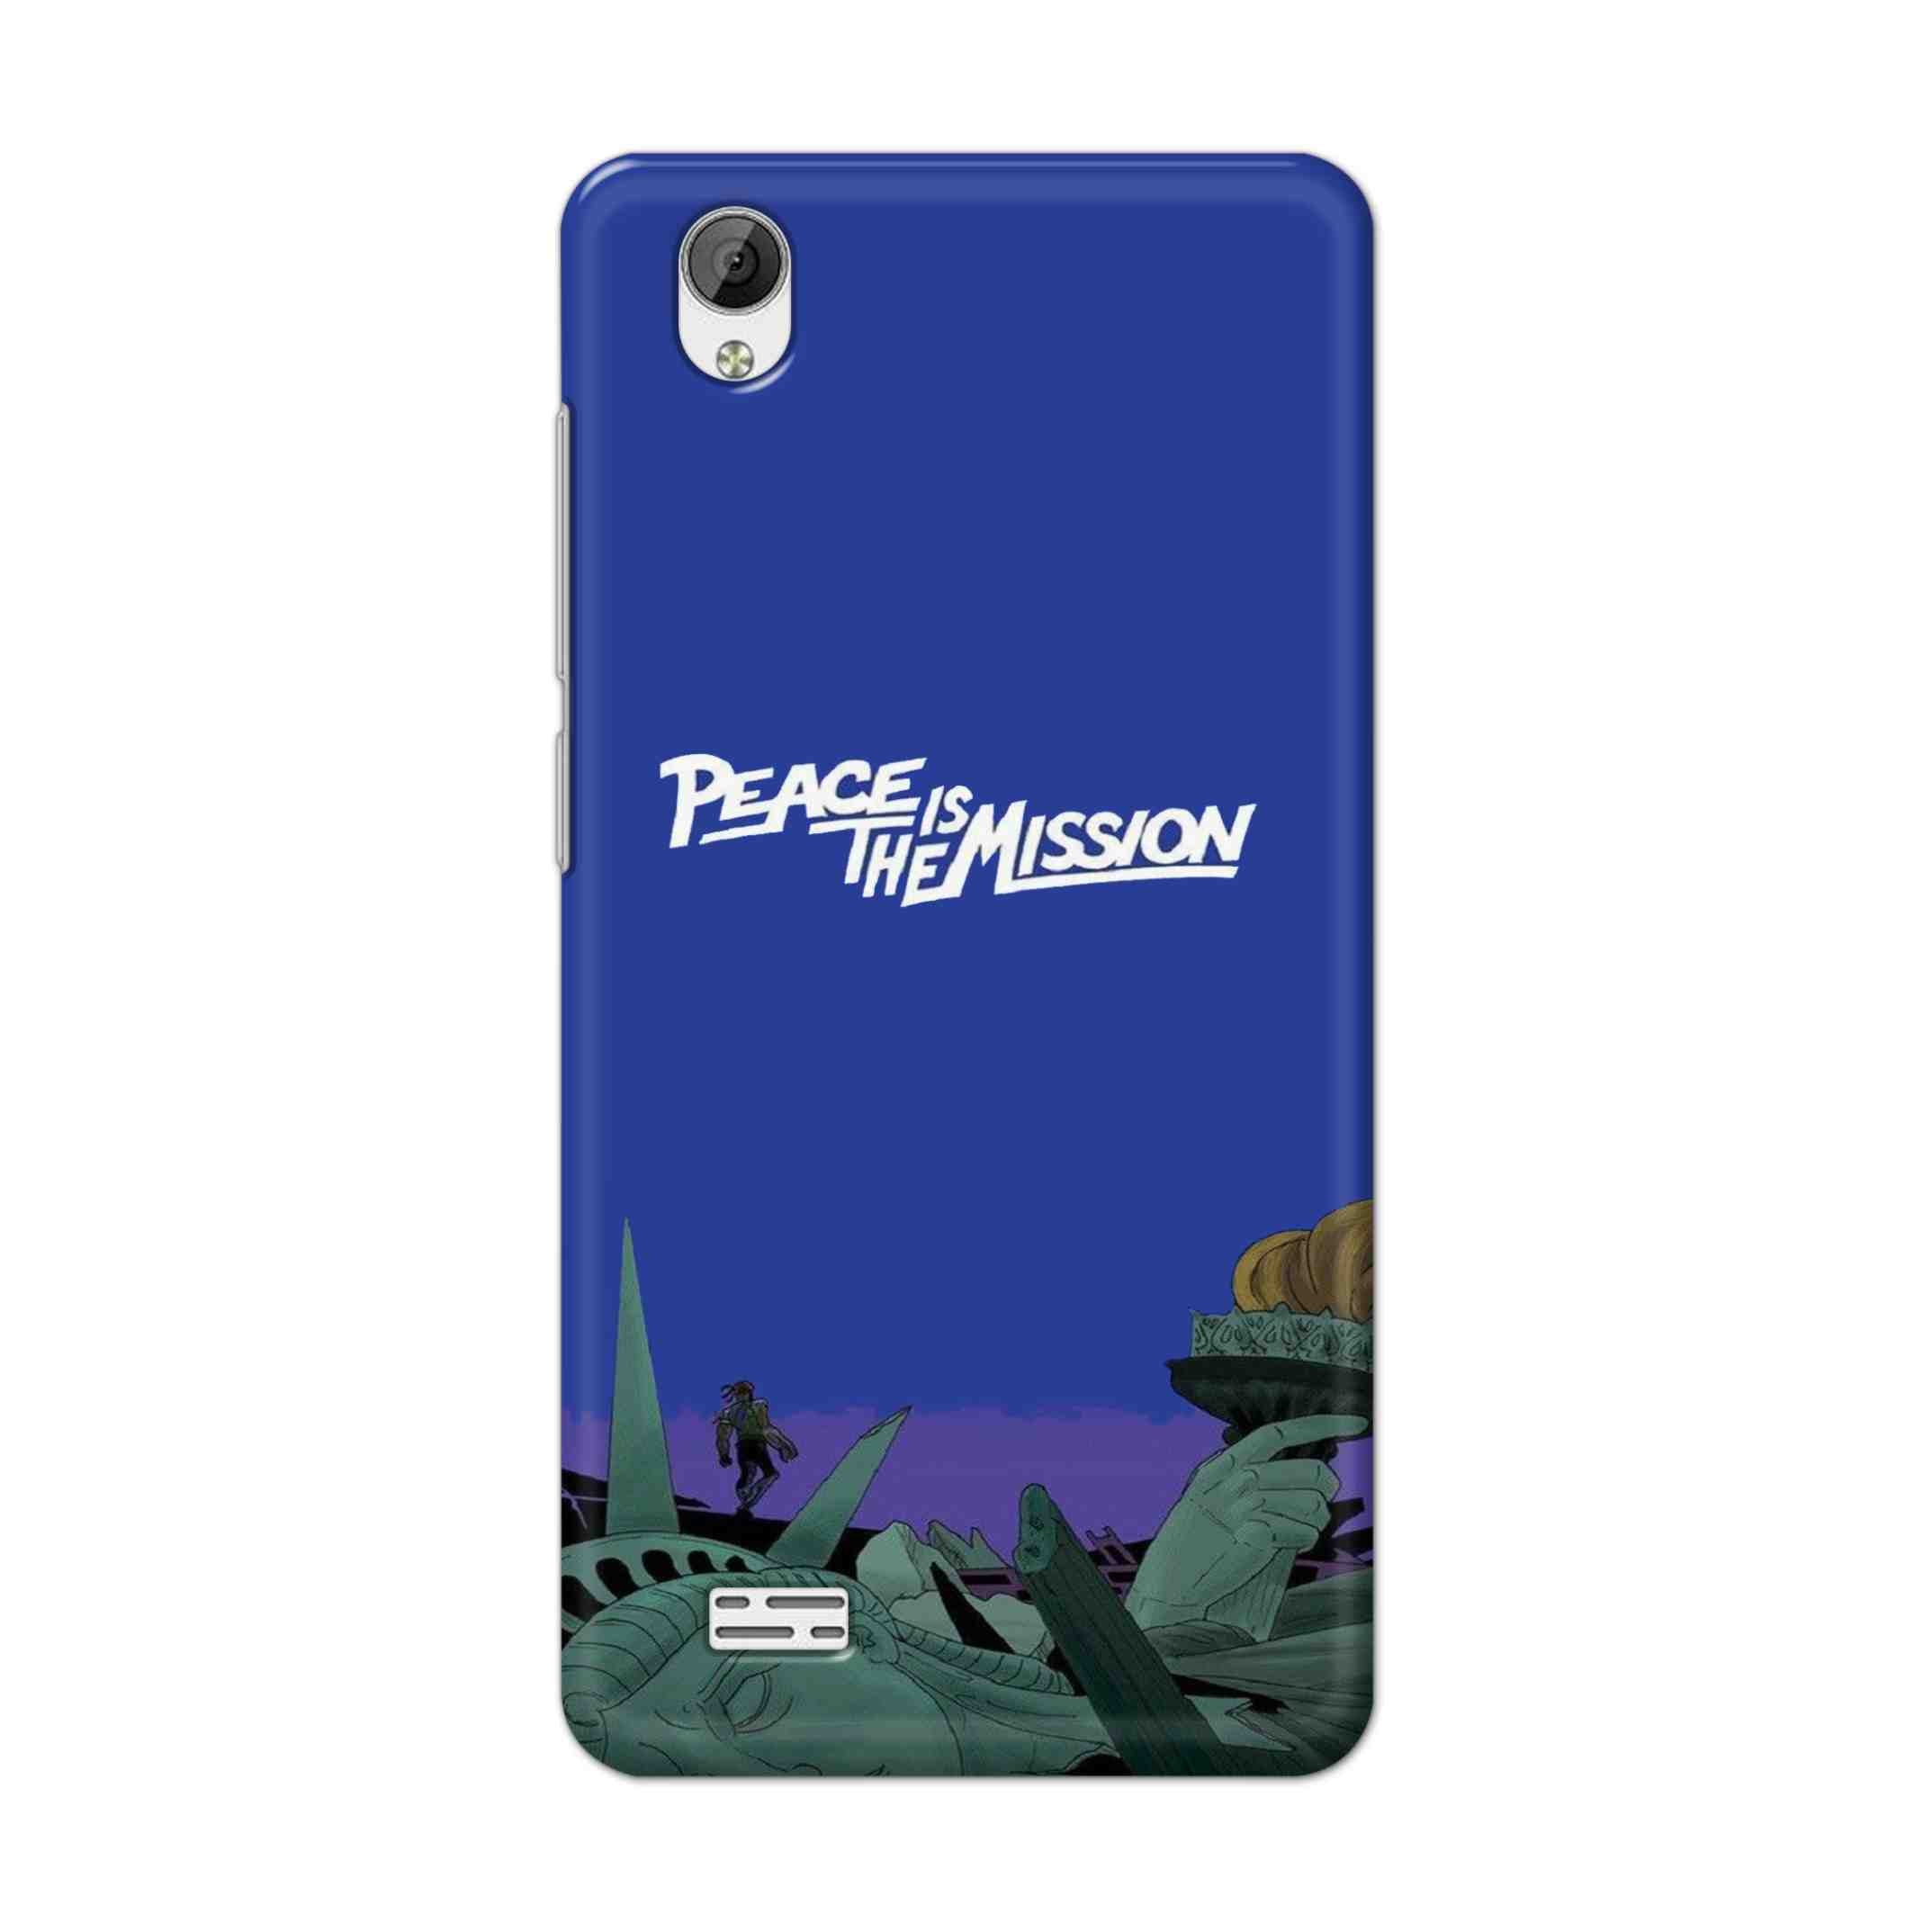 Buy Peace Is The Misson Hard Back Mobile Phone Case Cover For Vivo Y31 Online